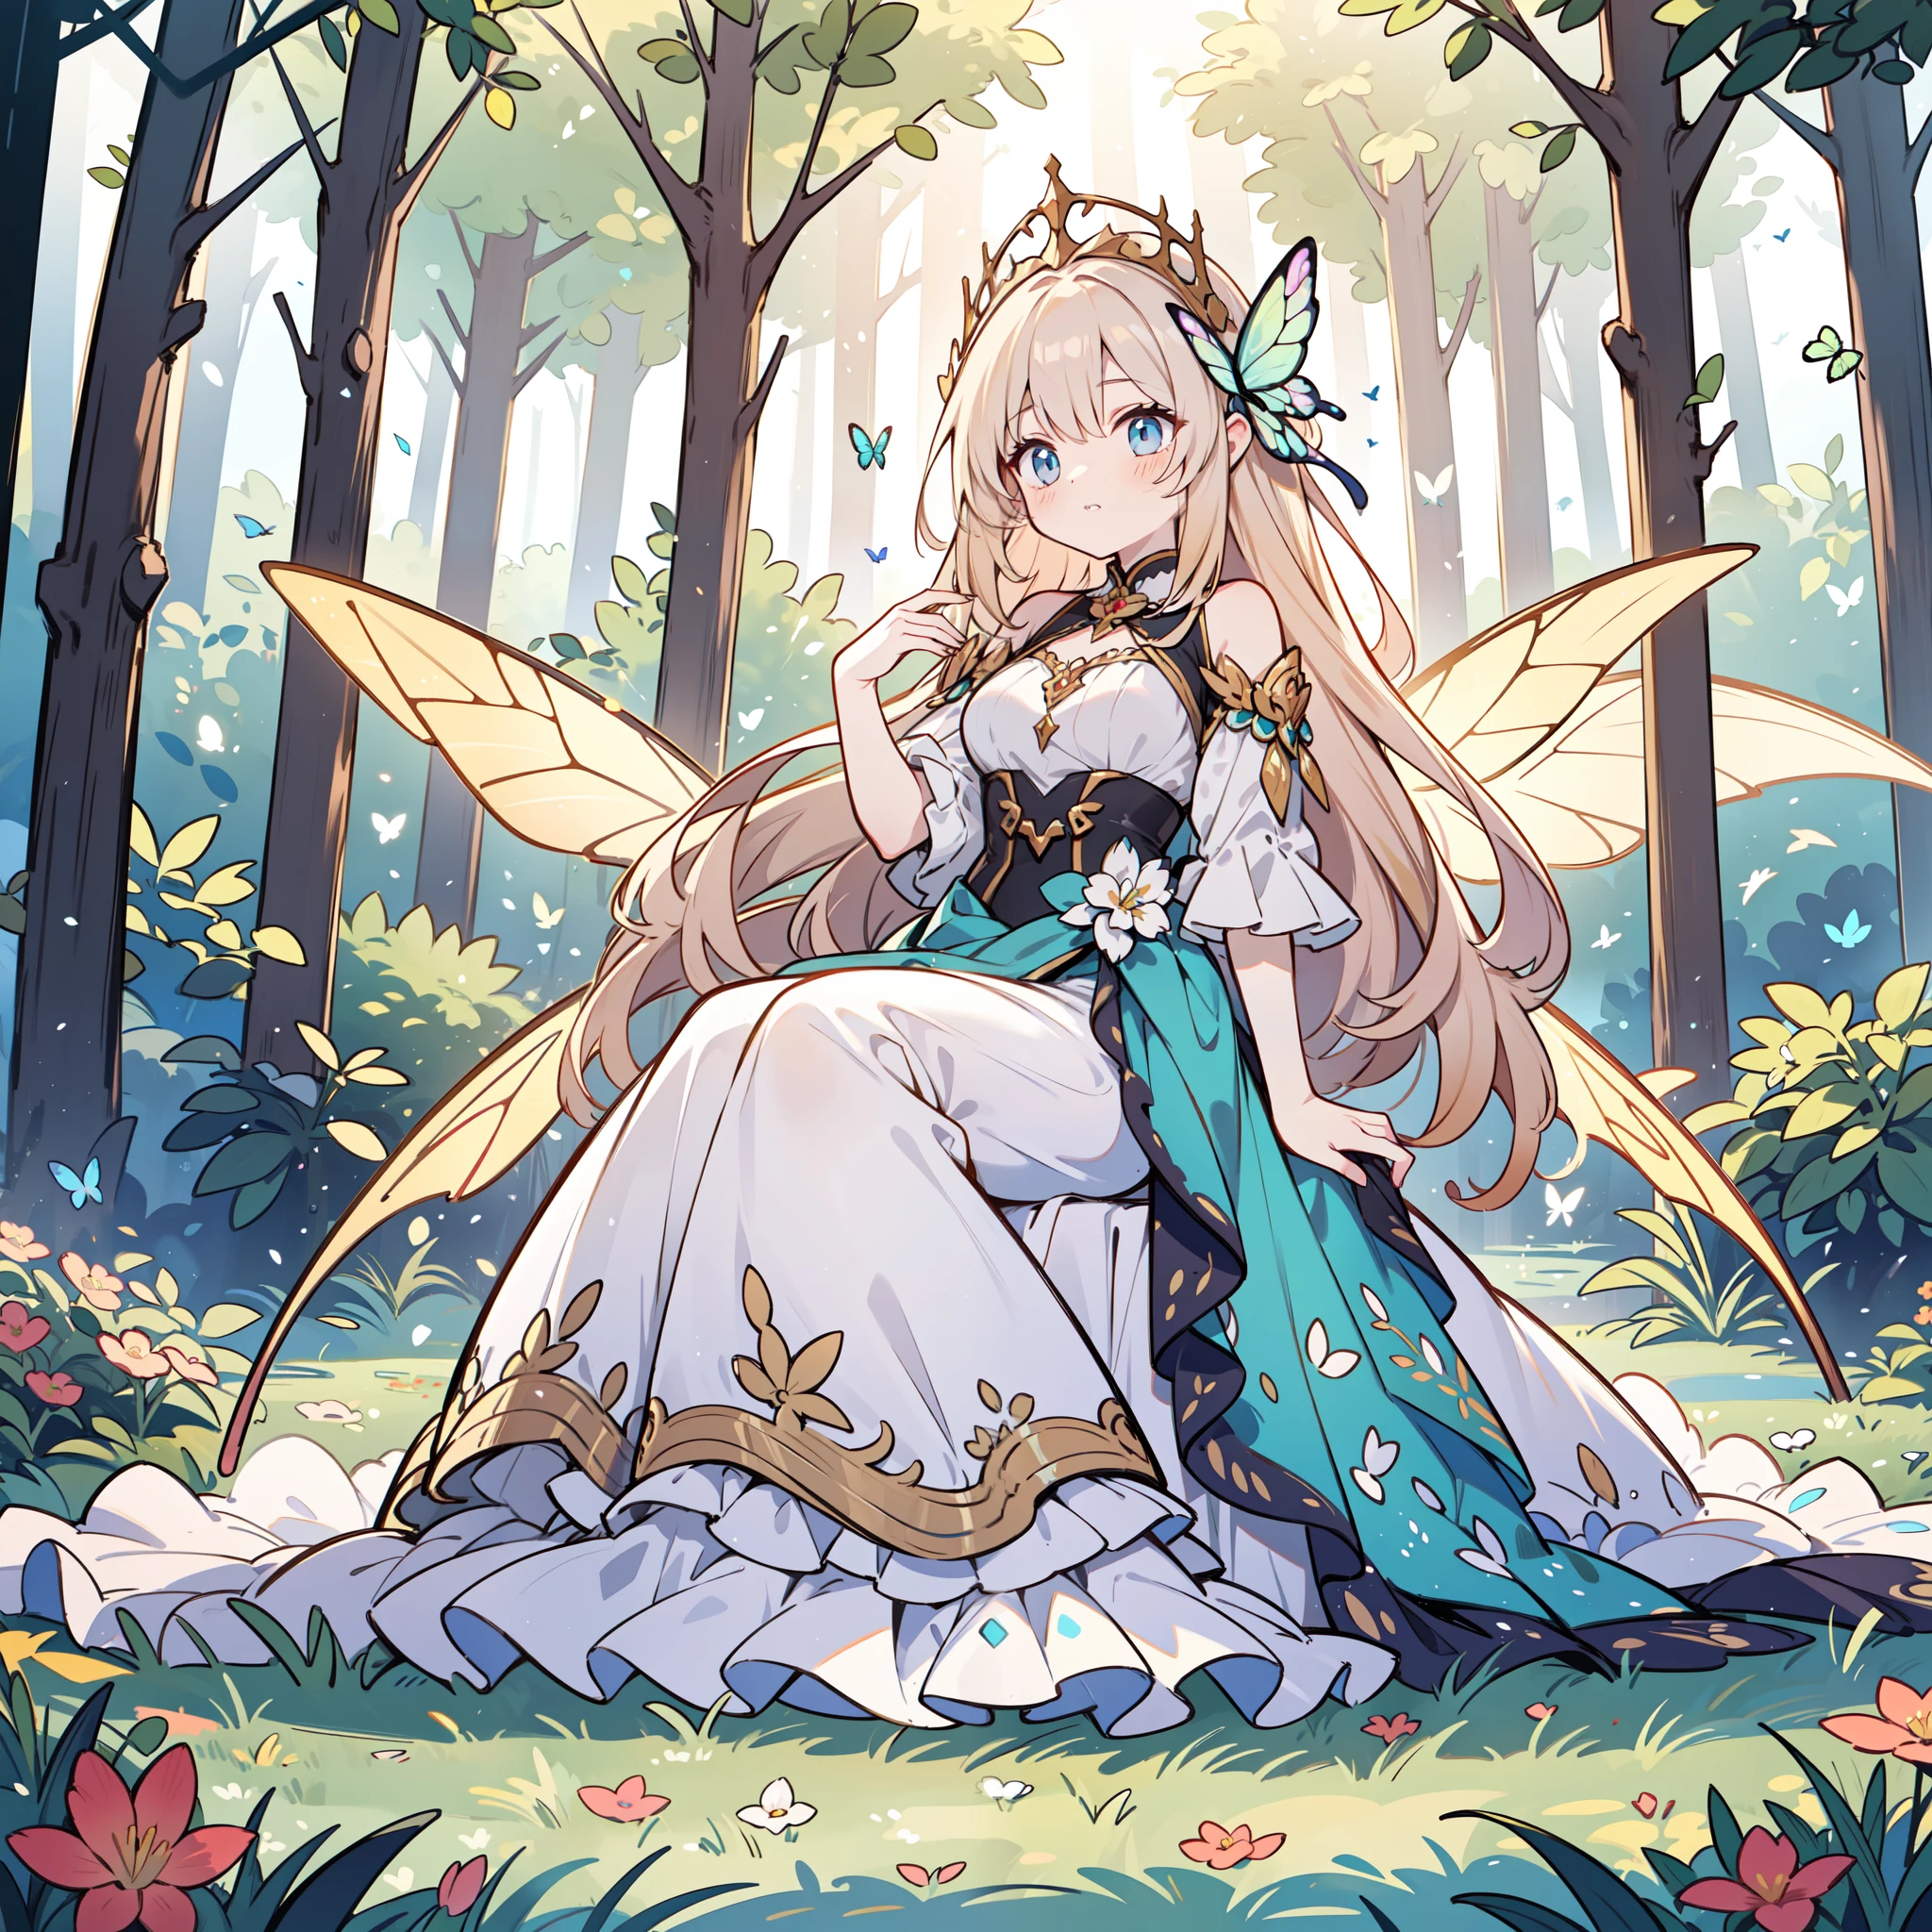 The Fairy of Light appeared in the spring in the night forest. She is a beautiful, Pale, Bright female figure with stained glass butterfly wings on her back. She wears elaborate and delicate ornaments. Fantastic forest fountain with wildflowers. Detailed drawings. Sit on the ground. Vivid colors. High image quality.